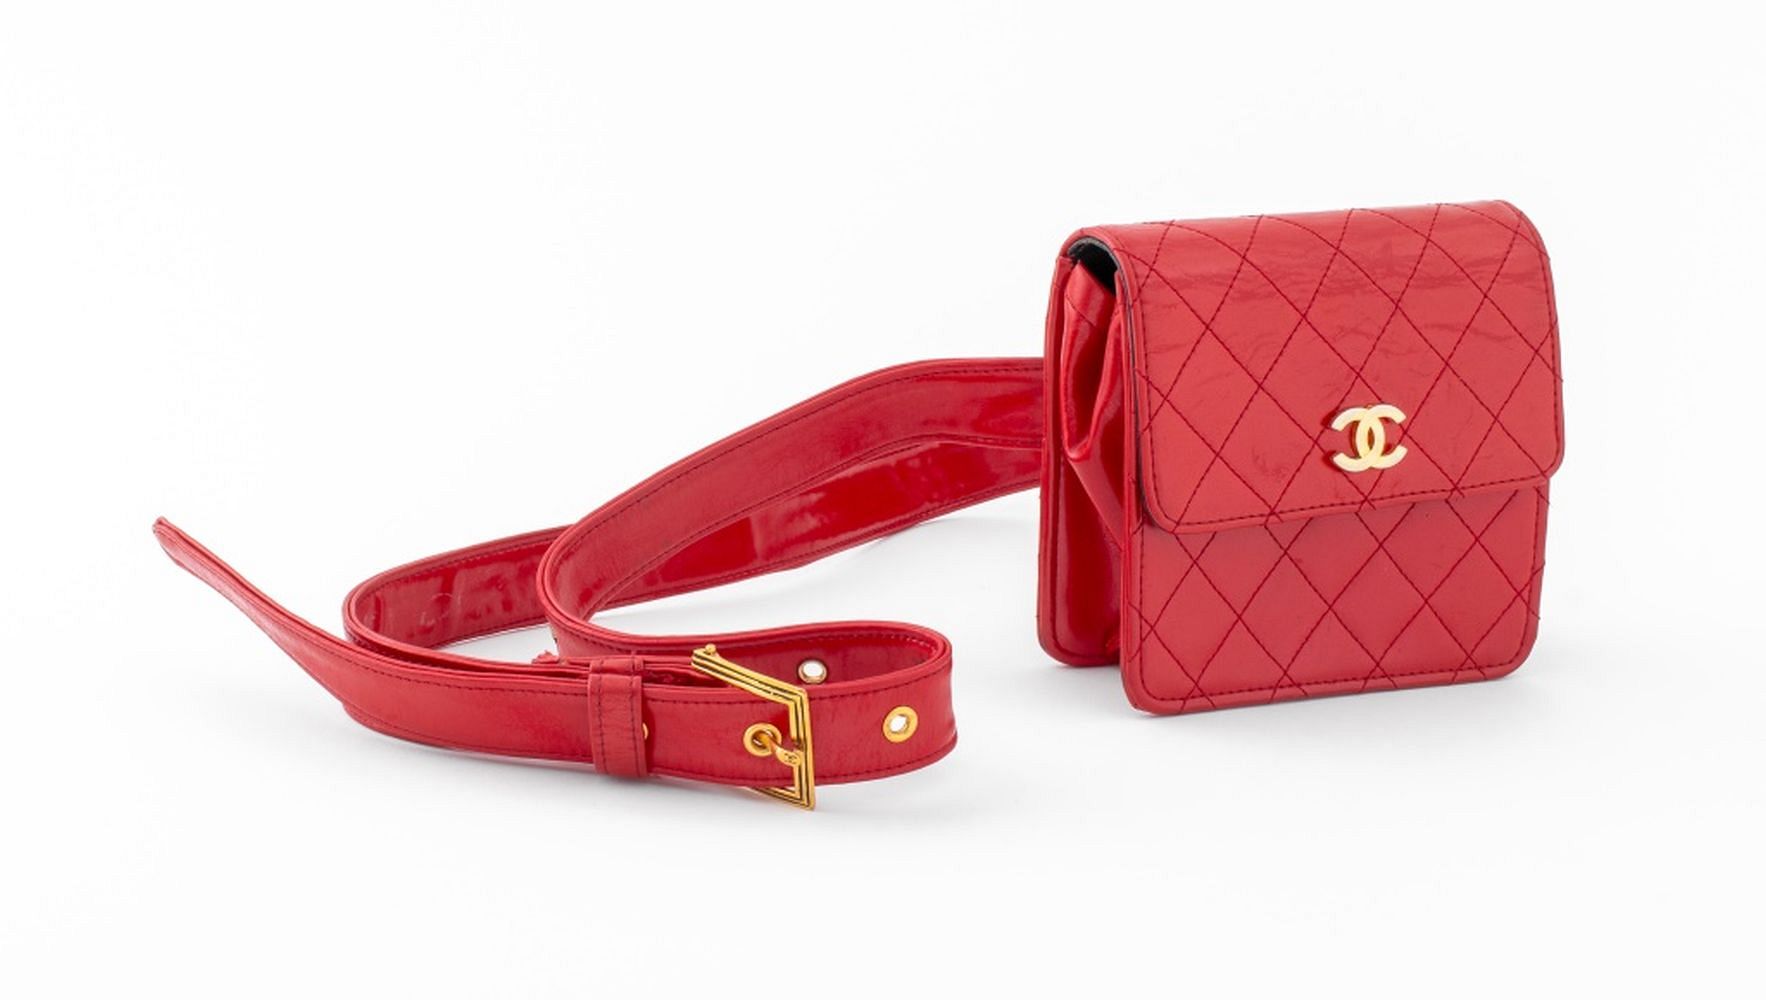 Chanel Red Patent Leather Waist Bag for sale at auction on 22nd October